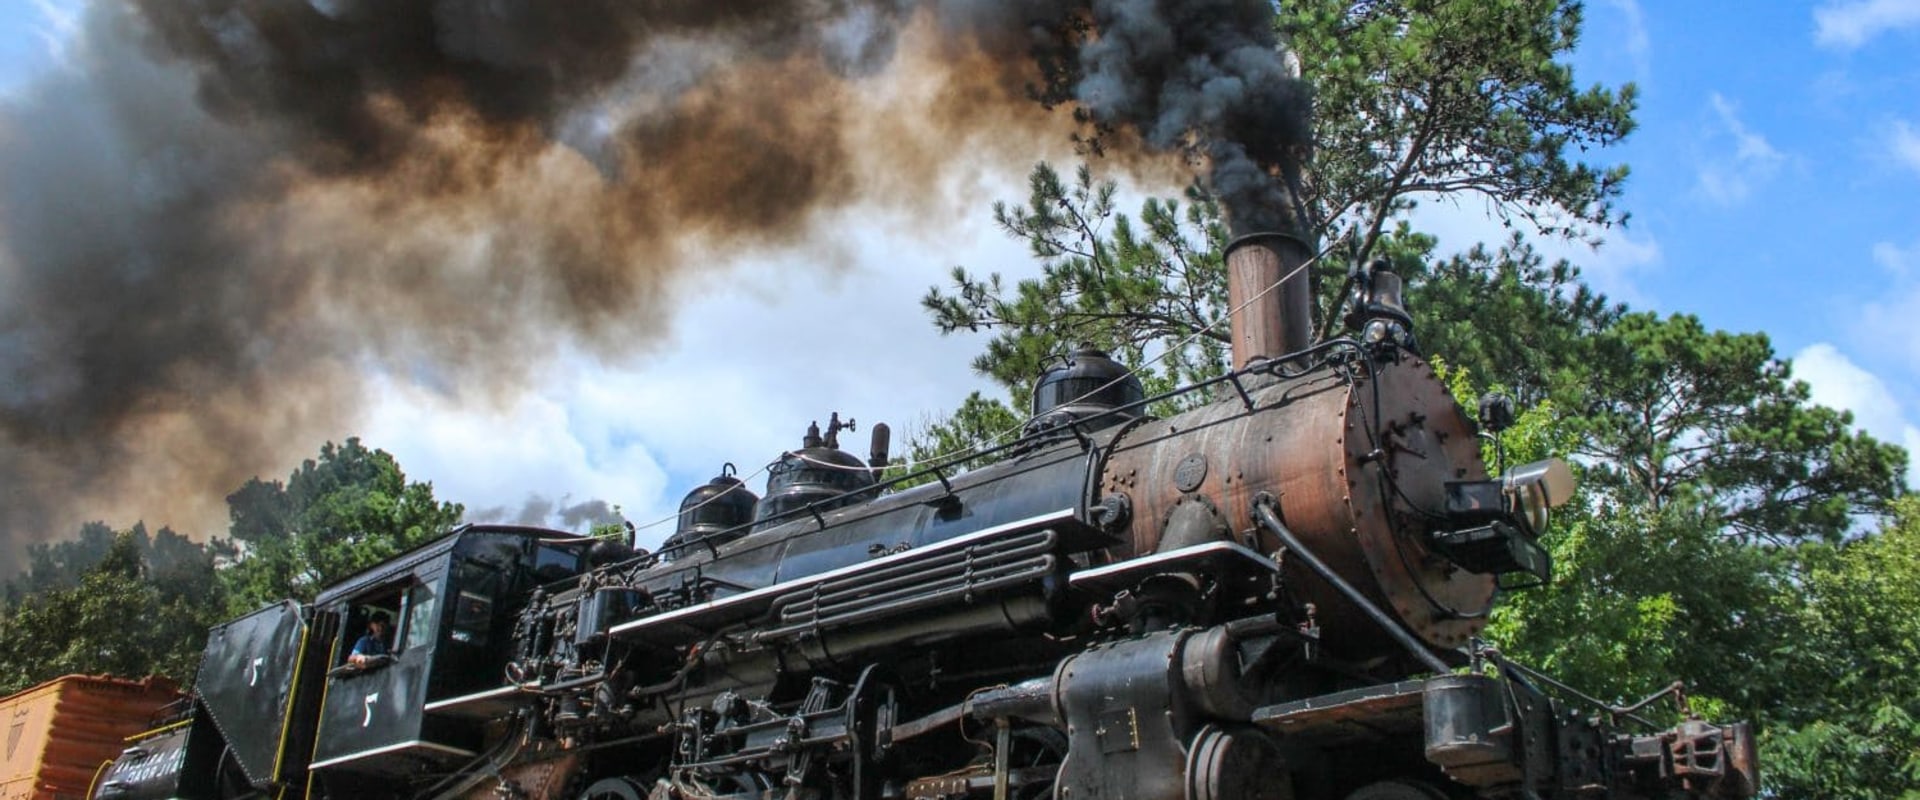 Discover Austin, Texas by Train: Special Deals for Tourists